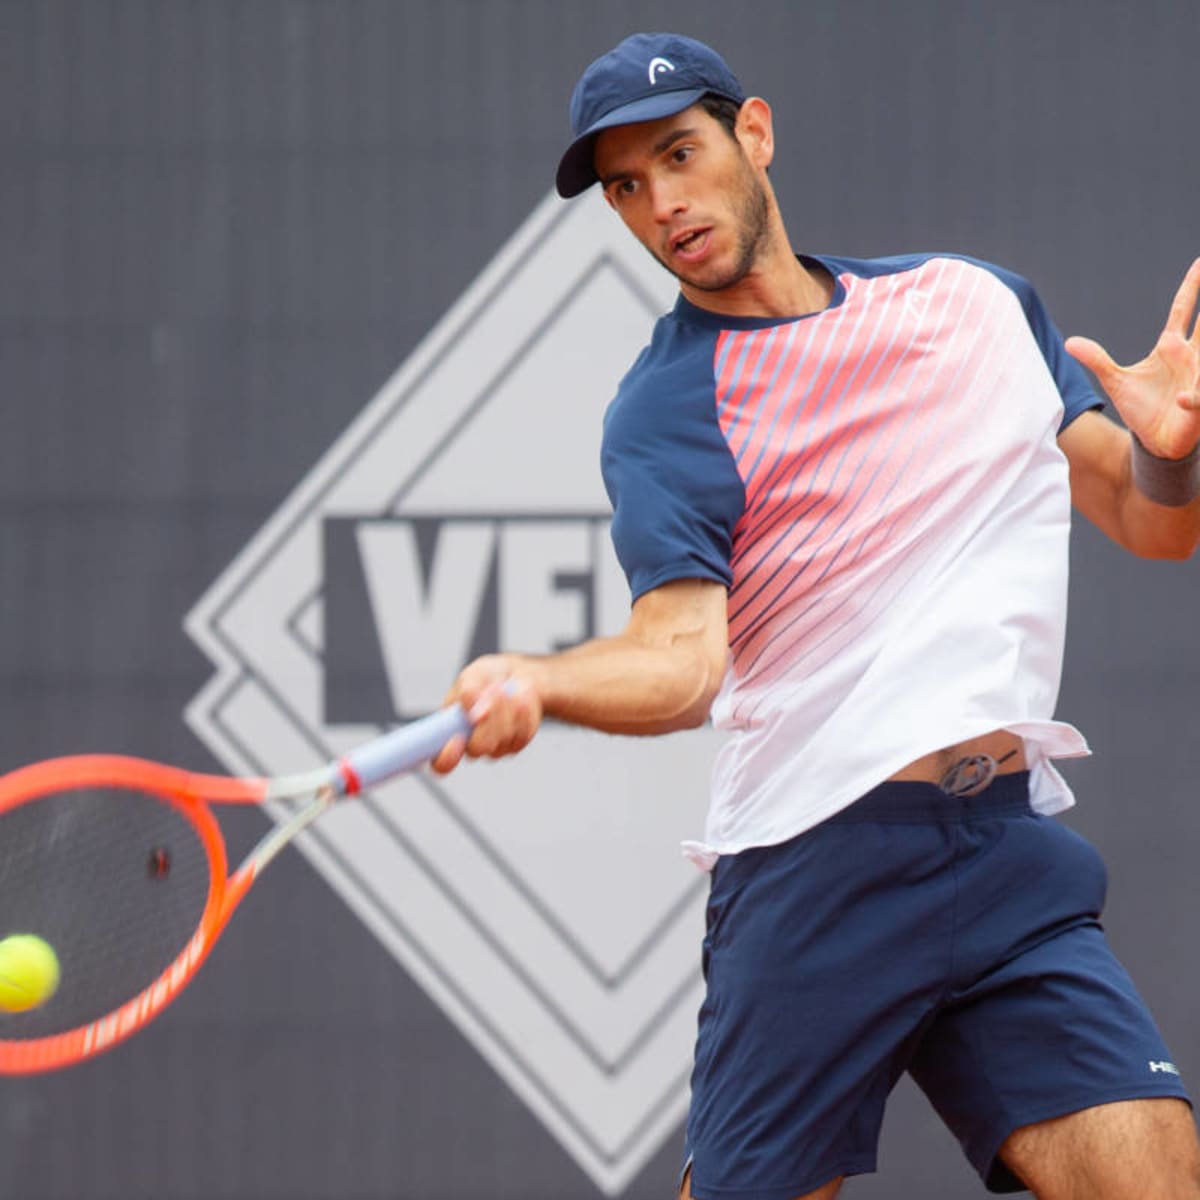 Maia 2-ATP Challenger, Singles Final Live Stream Watch Online, TV Channel, Start Time - How to Watch and Stream Major League and College Sports